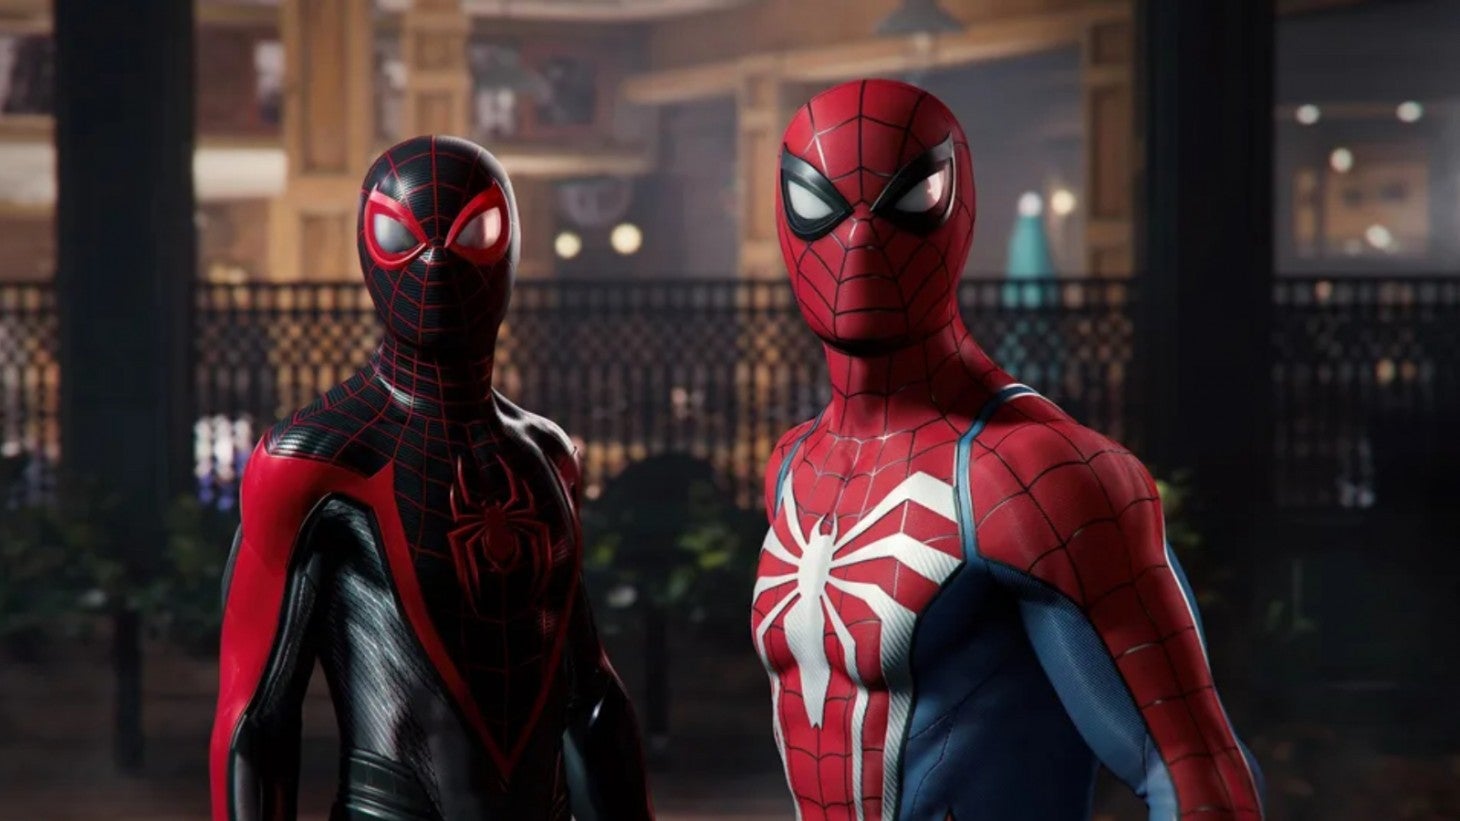 Peter and Miles are gonna be game and movie stars next year. (Image: Insomniac Games)